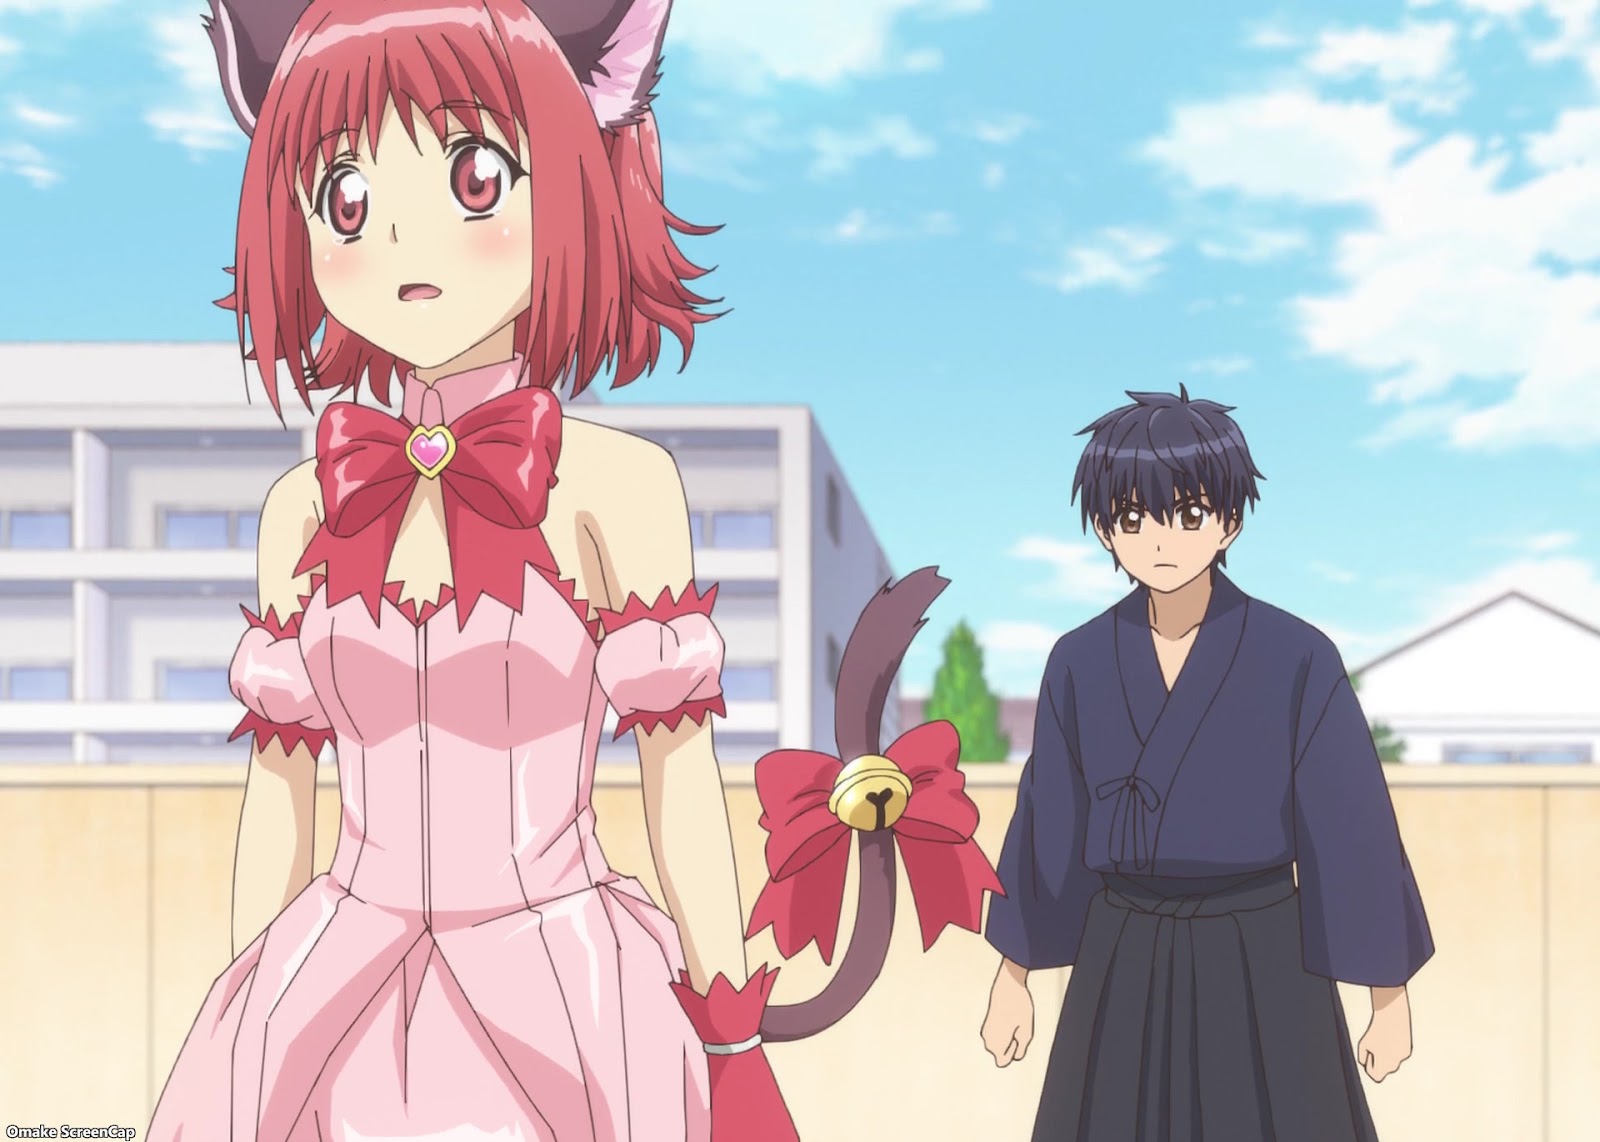 Anime Review: Tokyo Mew Mew New - Breaking it all Down